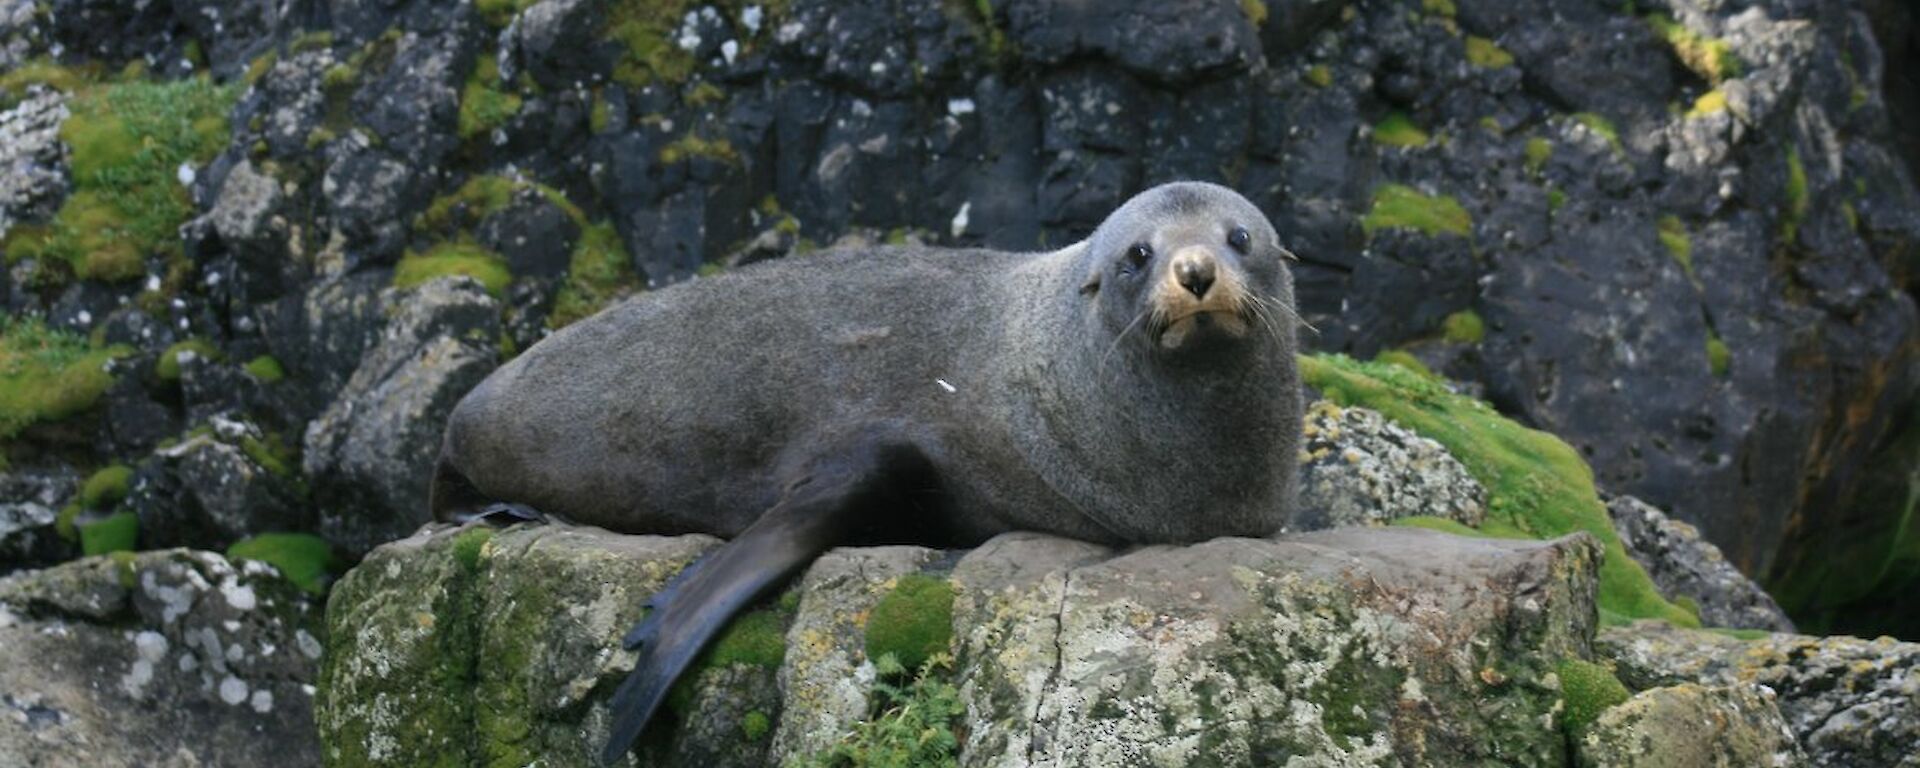 New Zealand fur seal at the southern end of the island